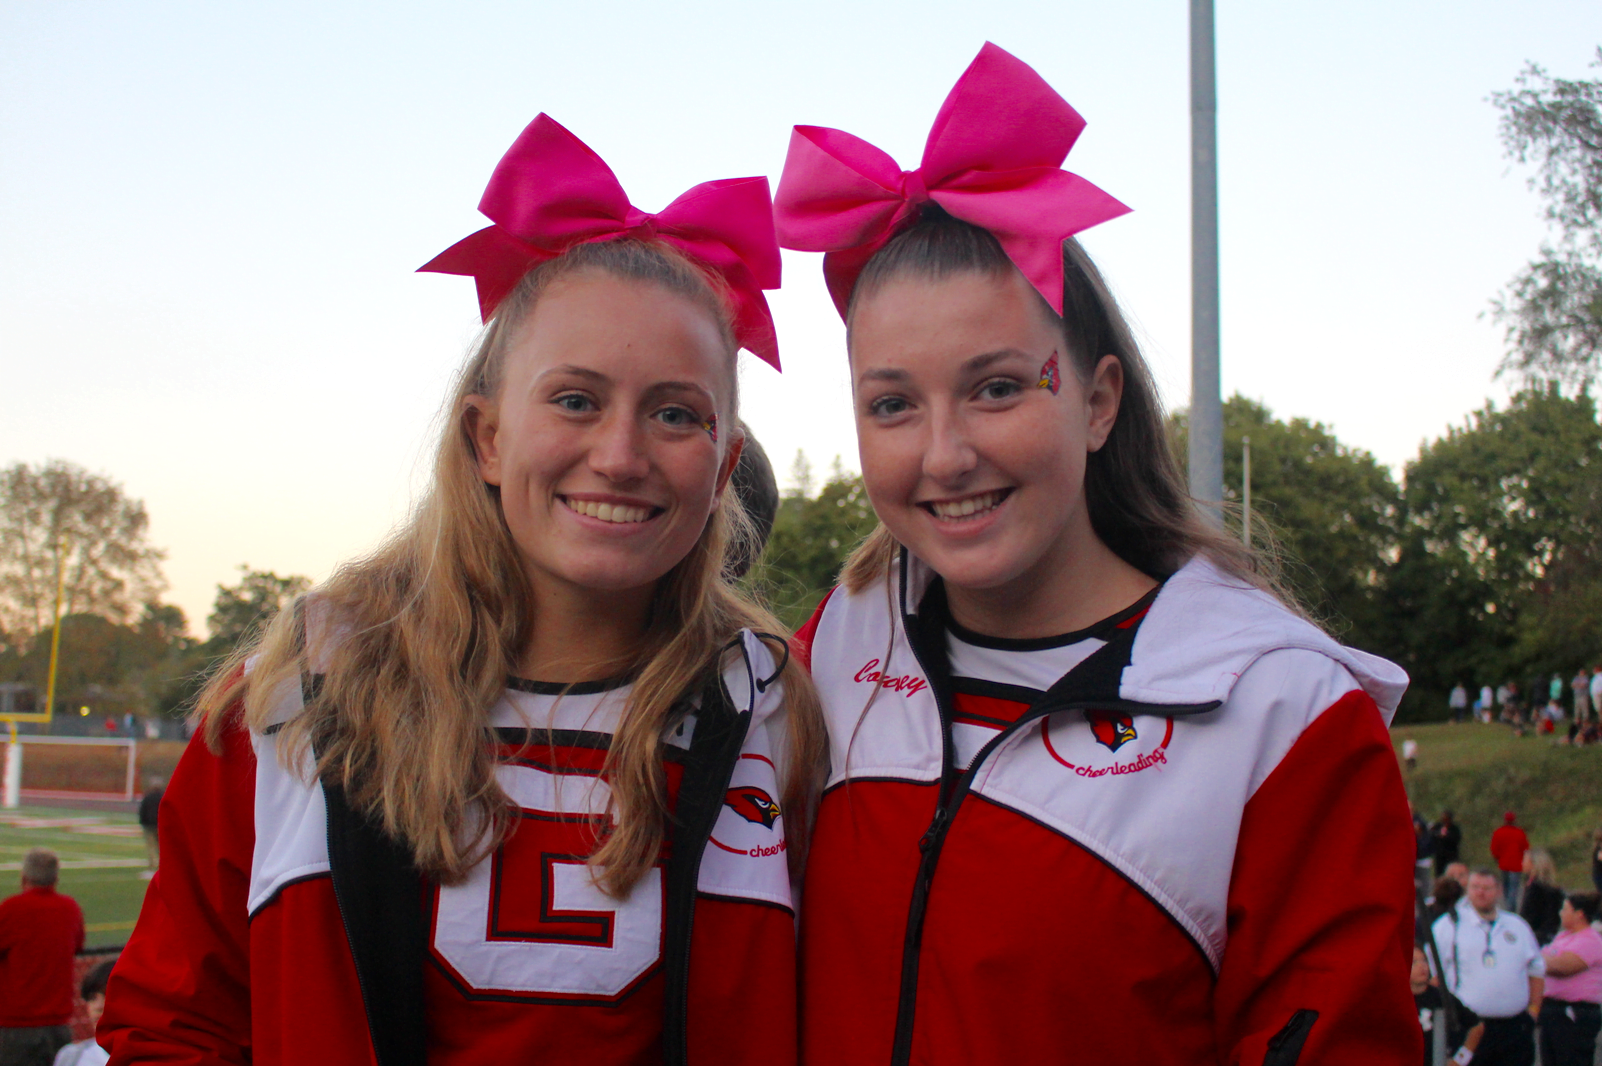 GHS cheerleaders sold 50-50 raffle tickets at Monday's game against Norwalk High School Bears. Oct 2, 2017 Photo: Leslie Yager